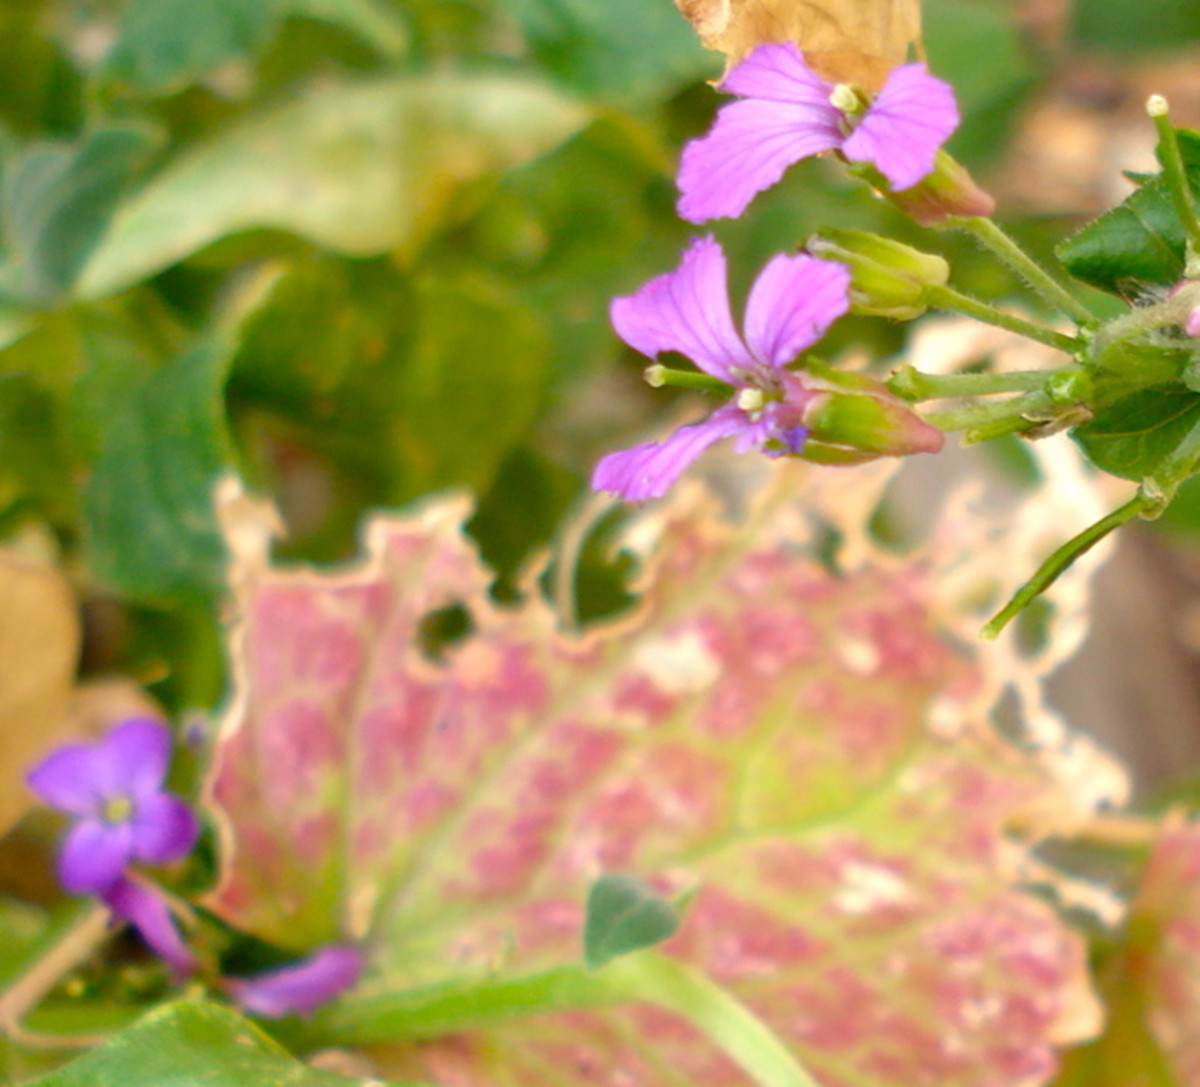 Violet-coloured Flowers in the Shape of a Cross